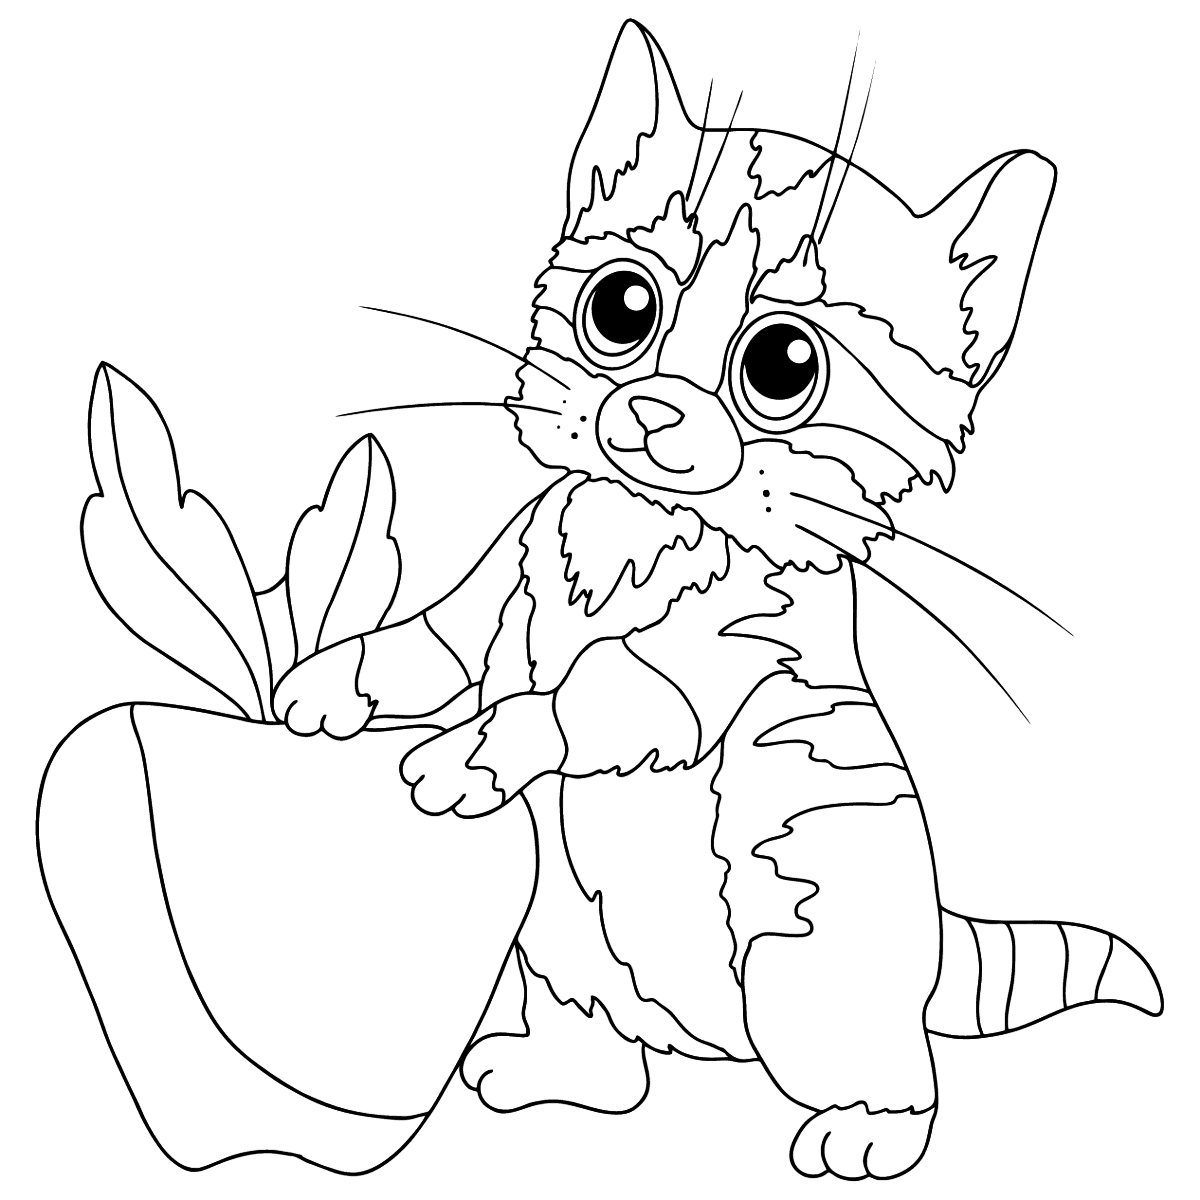 Coloring page. Cute artist kitten with easel and paint brush